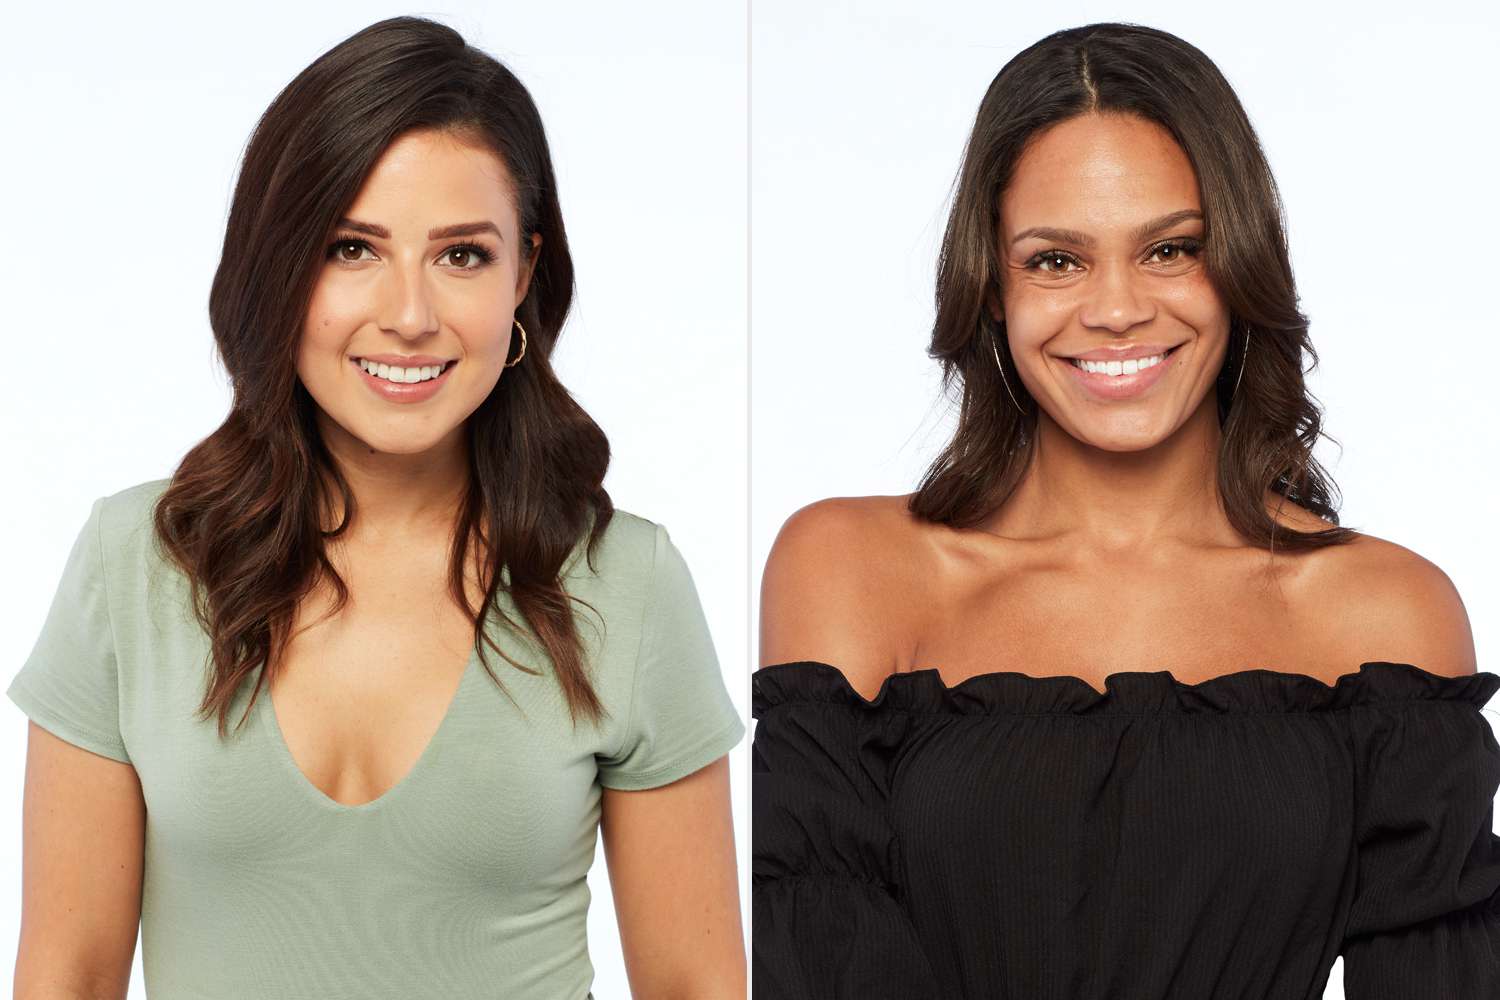 Katie Thurston and Michelle Young, The Bachelor